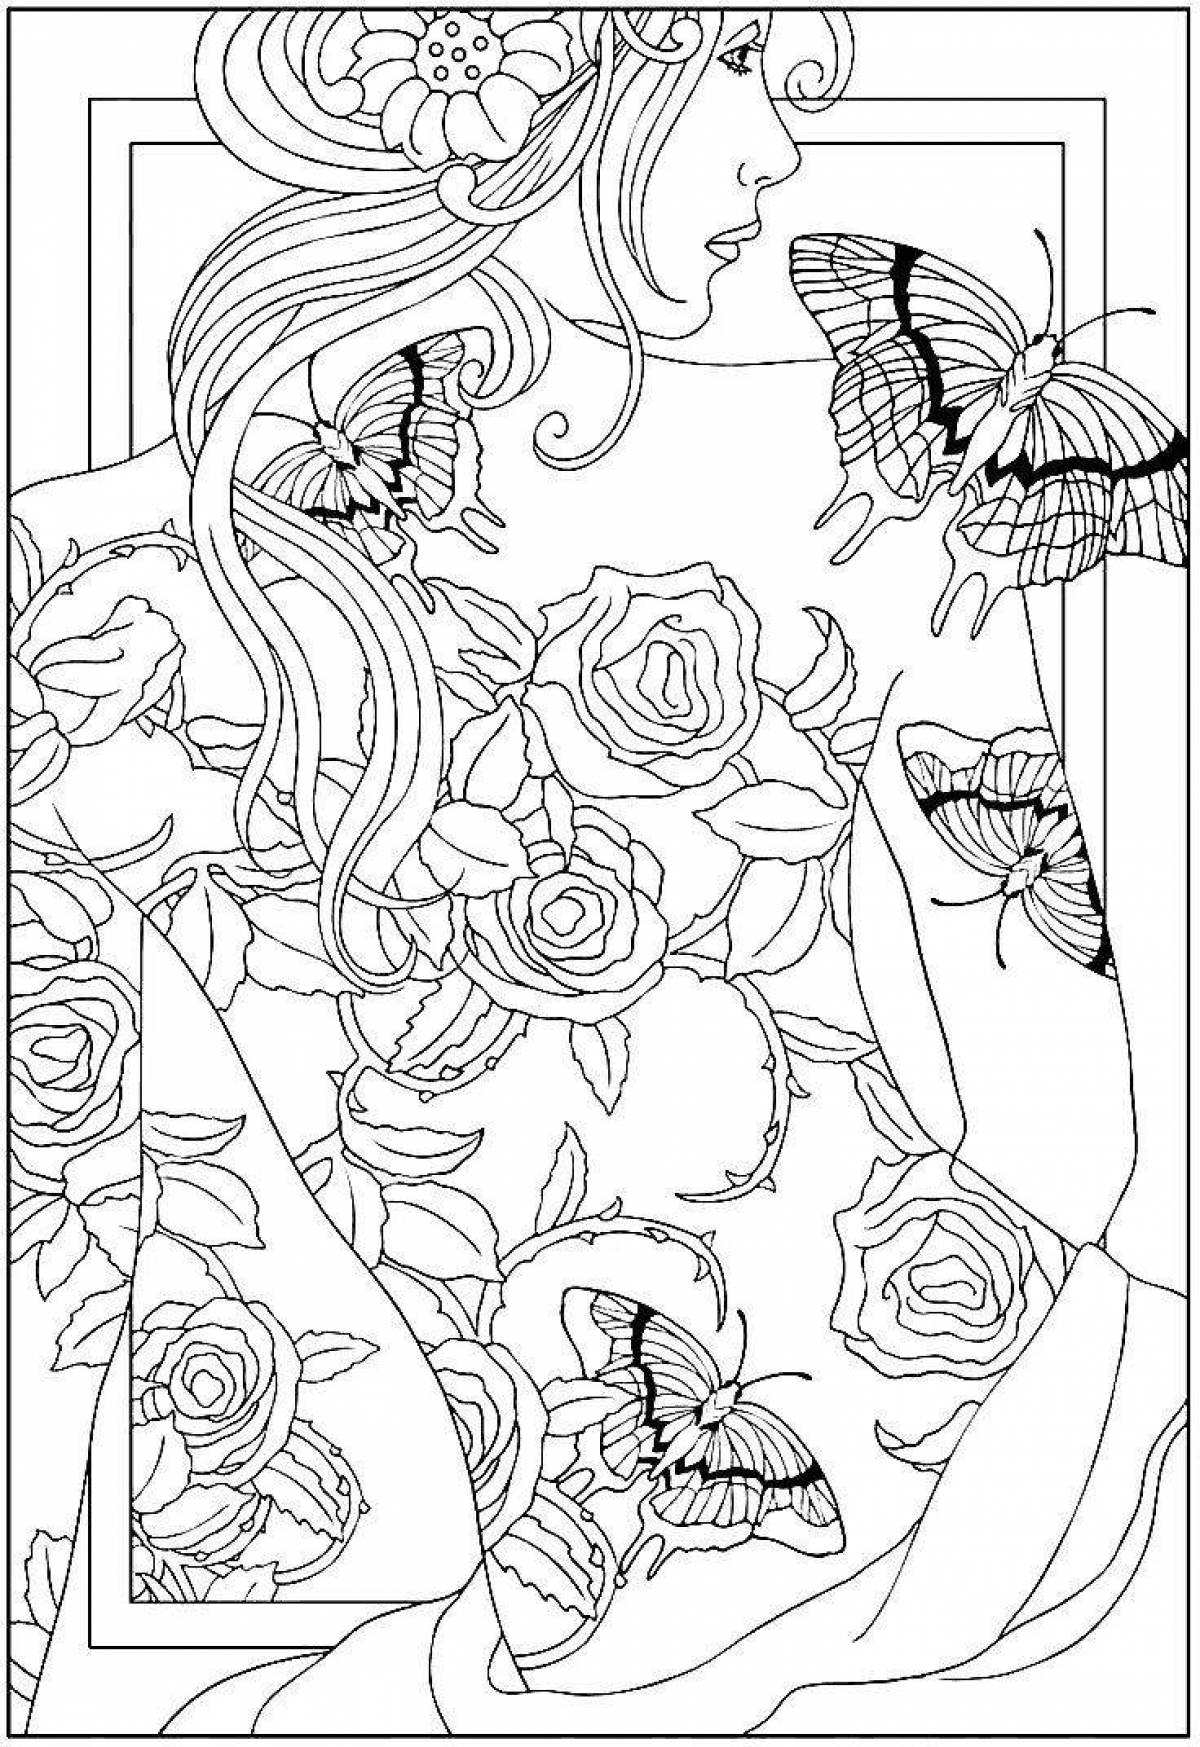 Exotic adult coloring book